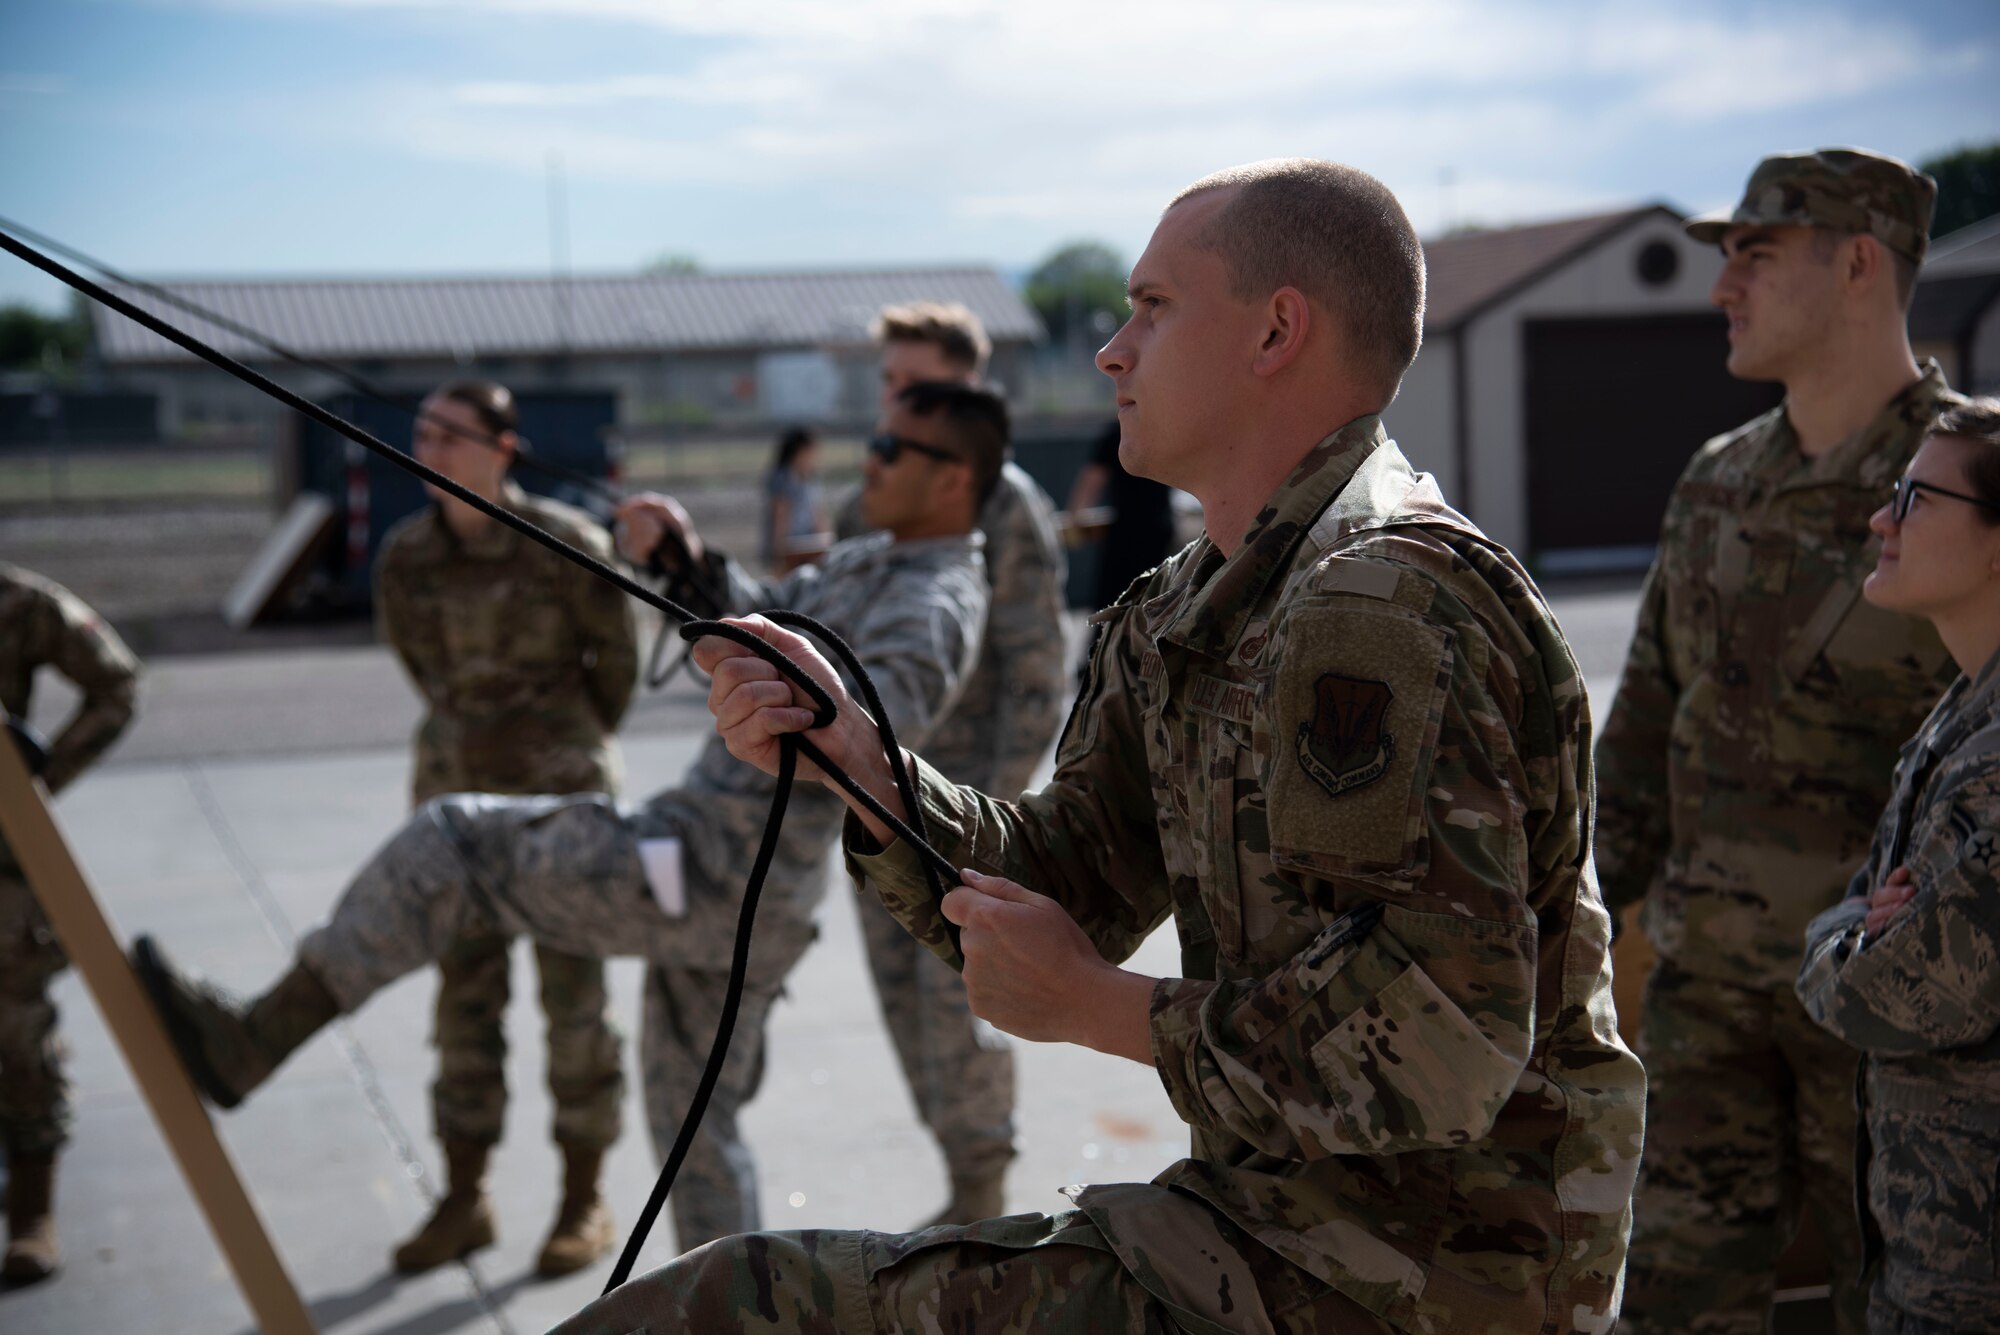 U.S. Air Force Staff Sgt. Jacob Royse, 366th Fighter Wing A2 (Intell) NCOIC of combat intell cell (front), and U.S. Air Force Capt. Menji Chiem, 366th Fighter Wing A2 chief of weapons (back), tighten the ropes of a TM18 tent on Mountain Home Air Force Base, Idaho, June 3, 2020. The TM18 tent is designed for both quick assembly and durability in extreme conditions making it ideal for Agile Combat Employment. (U.S. Air Force Photo by Airman 1st Class Nicholas Swift)